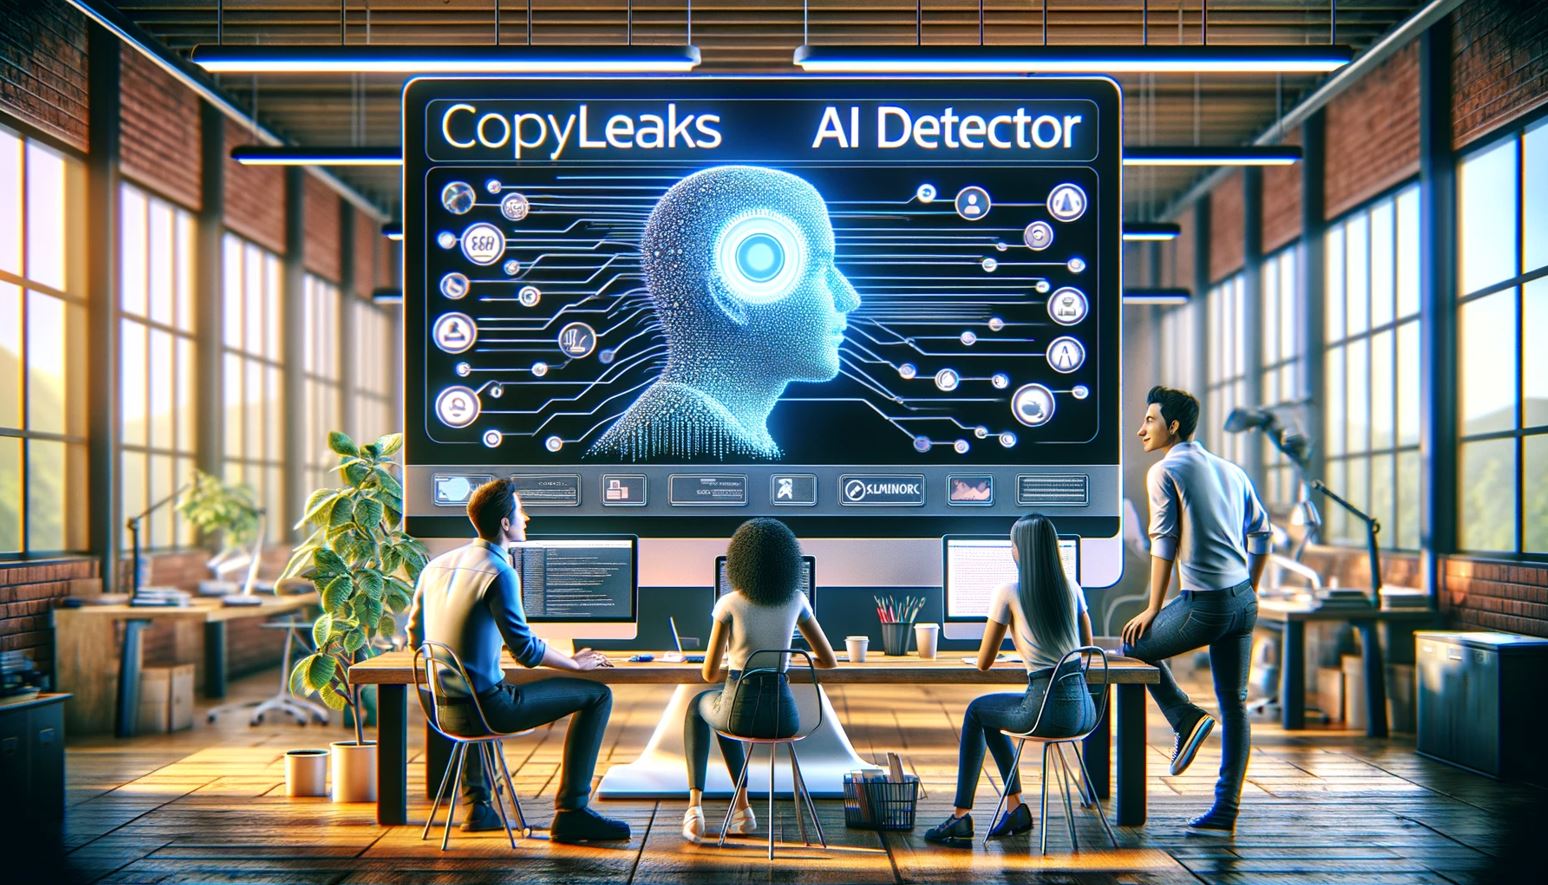 is copyleaks ai detector accurate